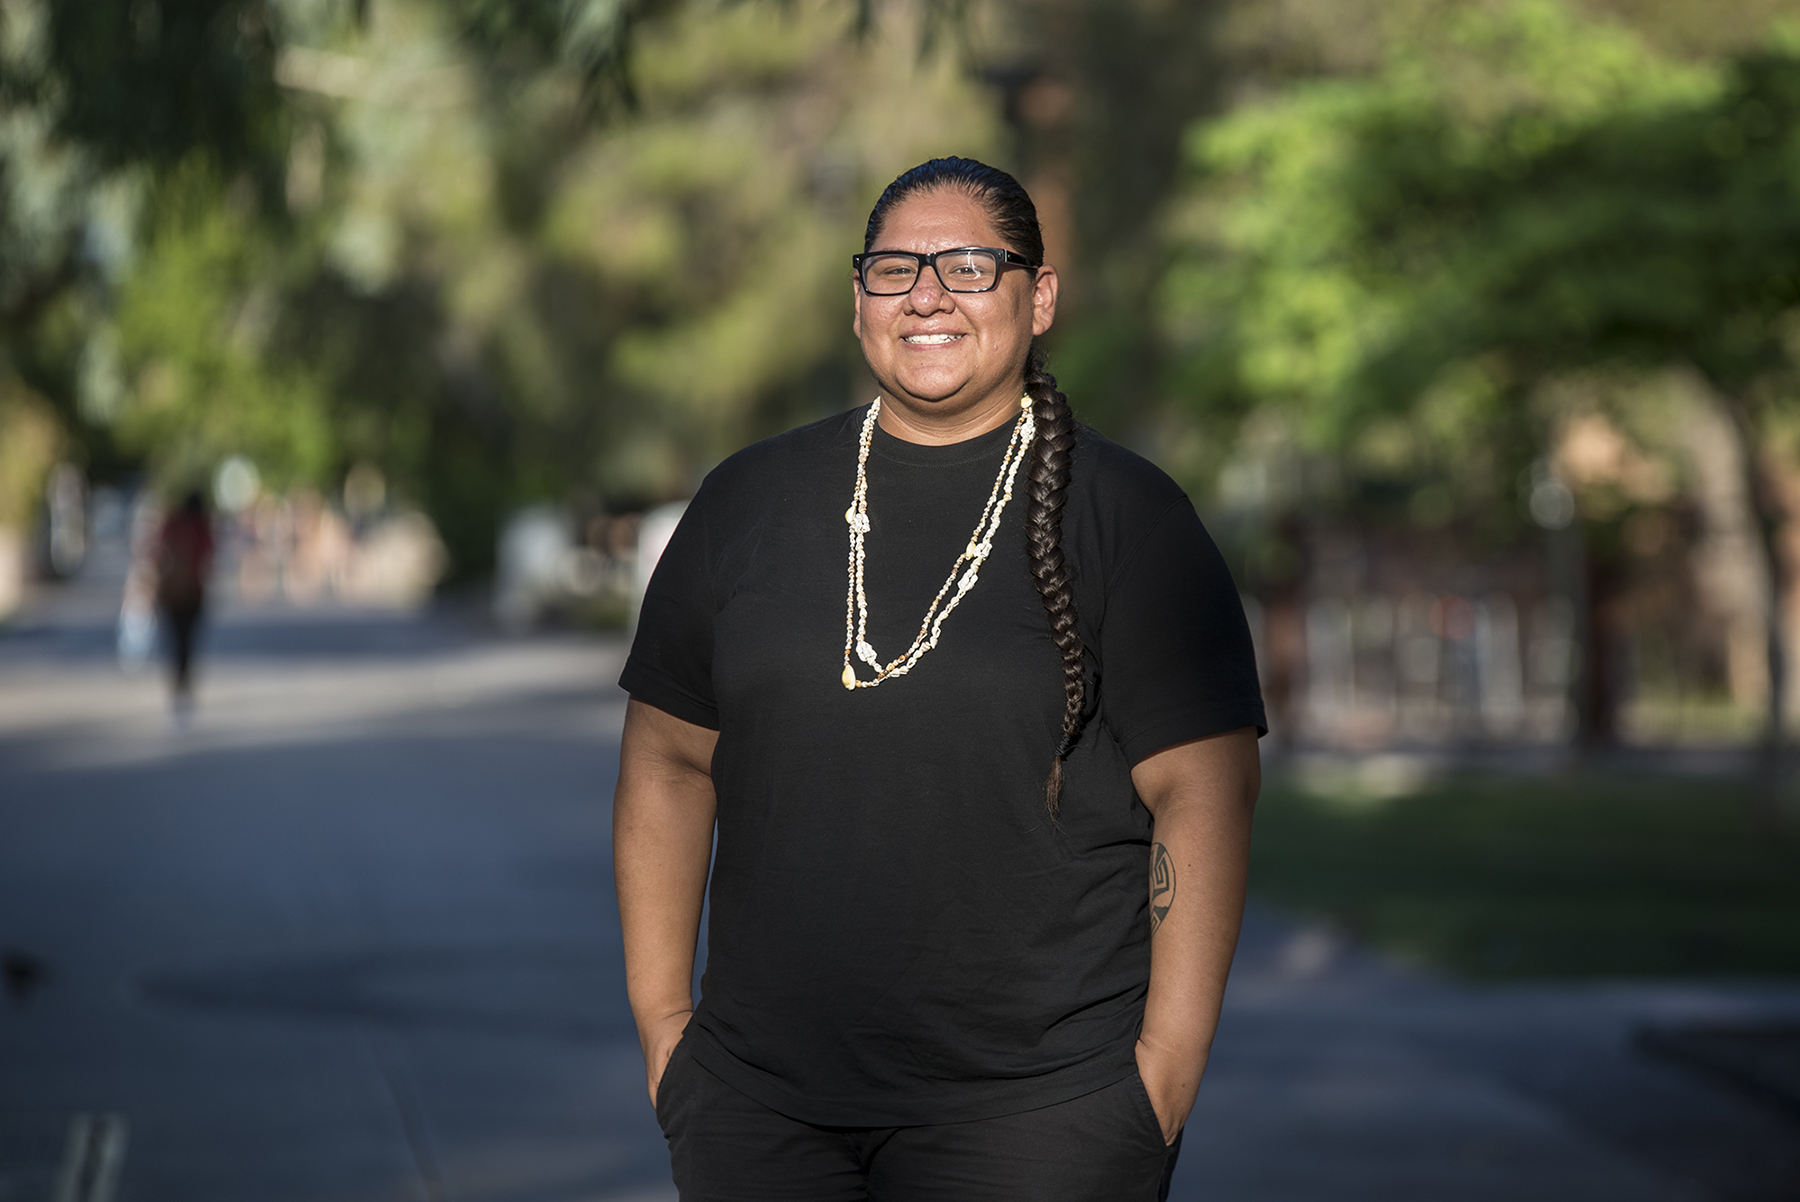 Mikah Carlos studies at Arizona State University and lives in the Salt River Pima-Maricopa Indian Community. She said a poll worker refused to let her use her tribal ID to vote in a recent election in Arizona. (Roman Knertser/News21)